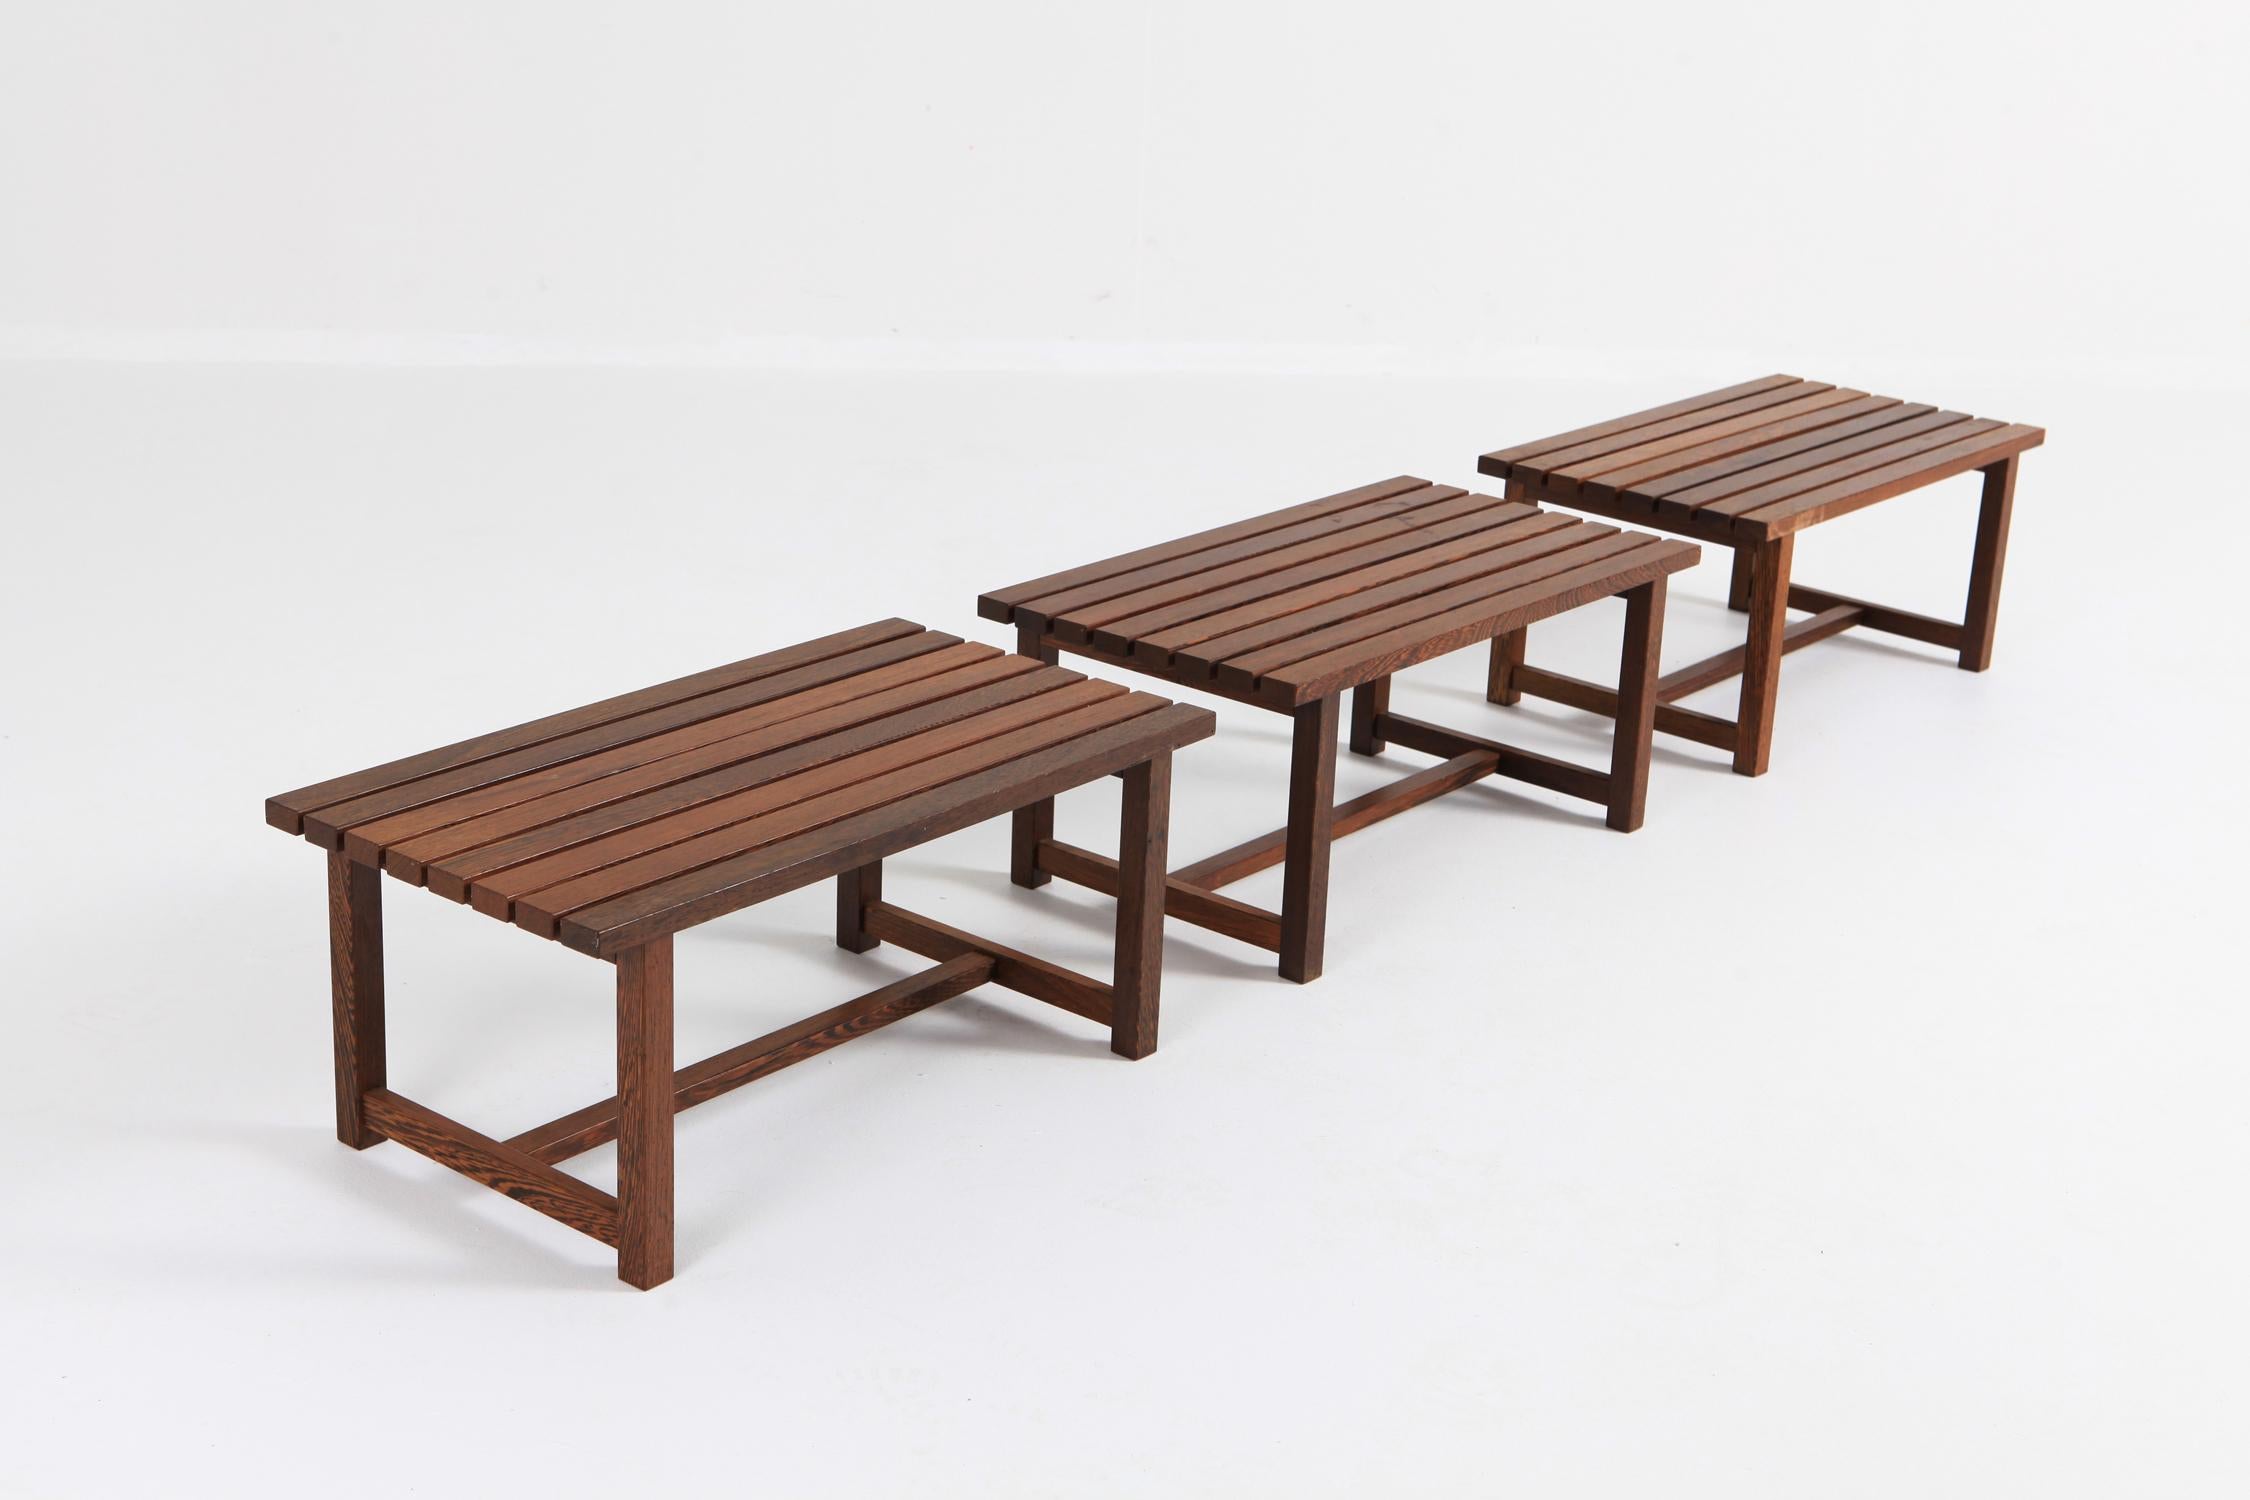 Minimalist 1960s benches in the style of Charlotte Perriand or Martin Visser.
Available per piece.
Can be used as a side table or as seating piece.
 